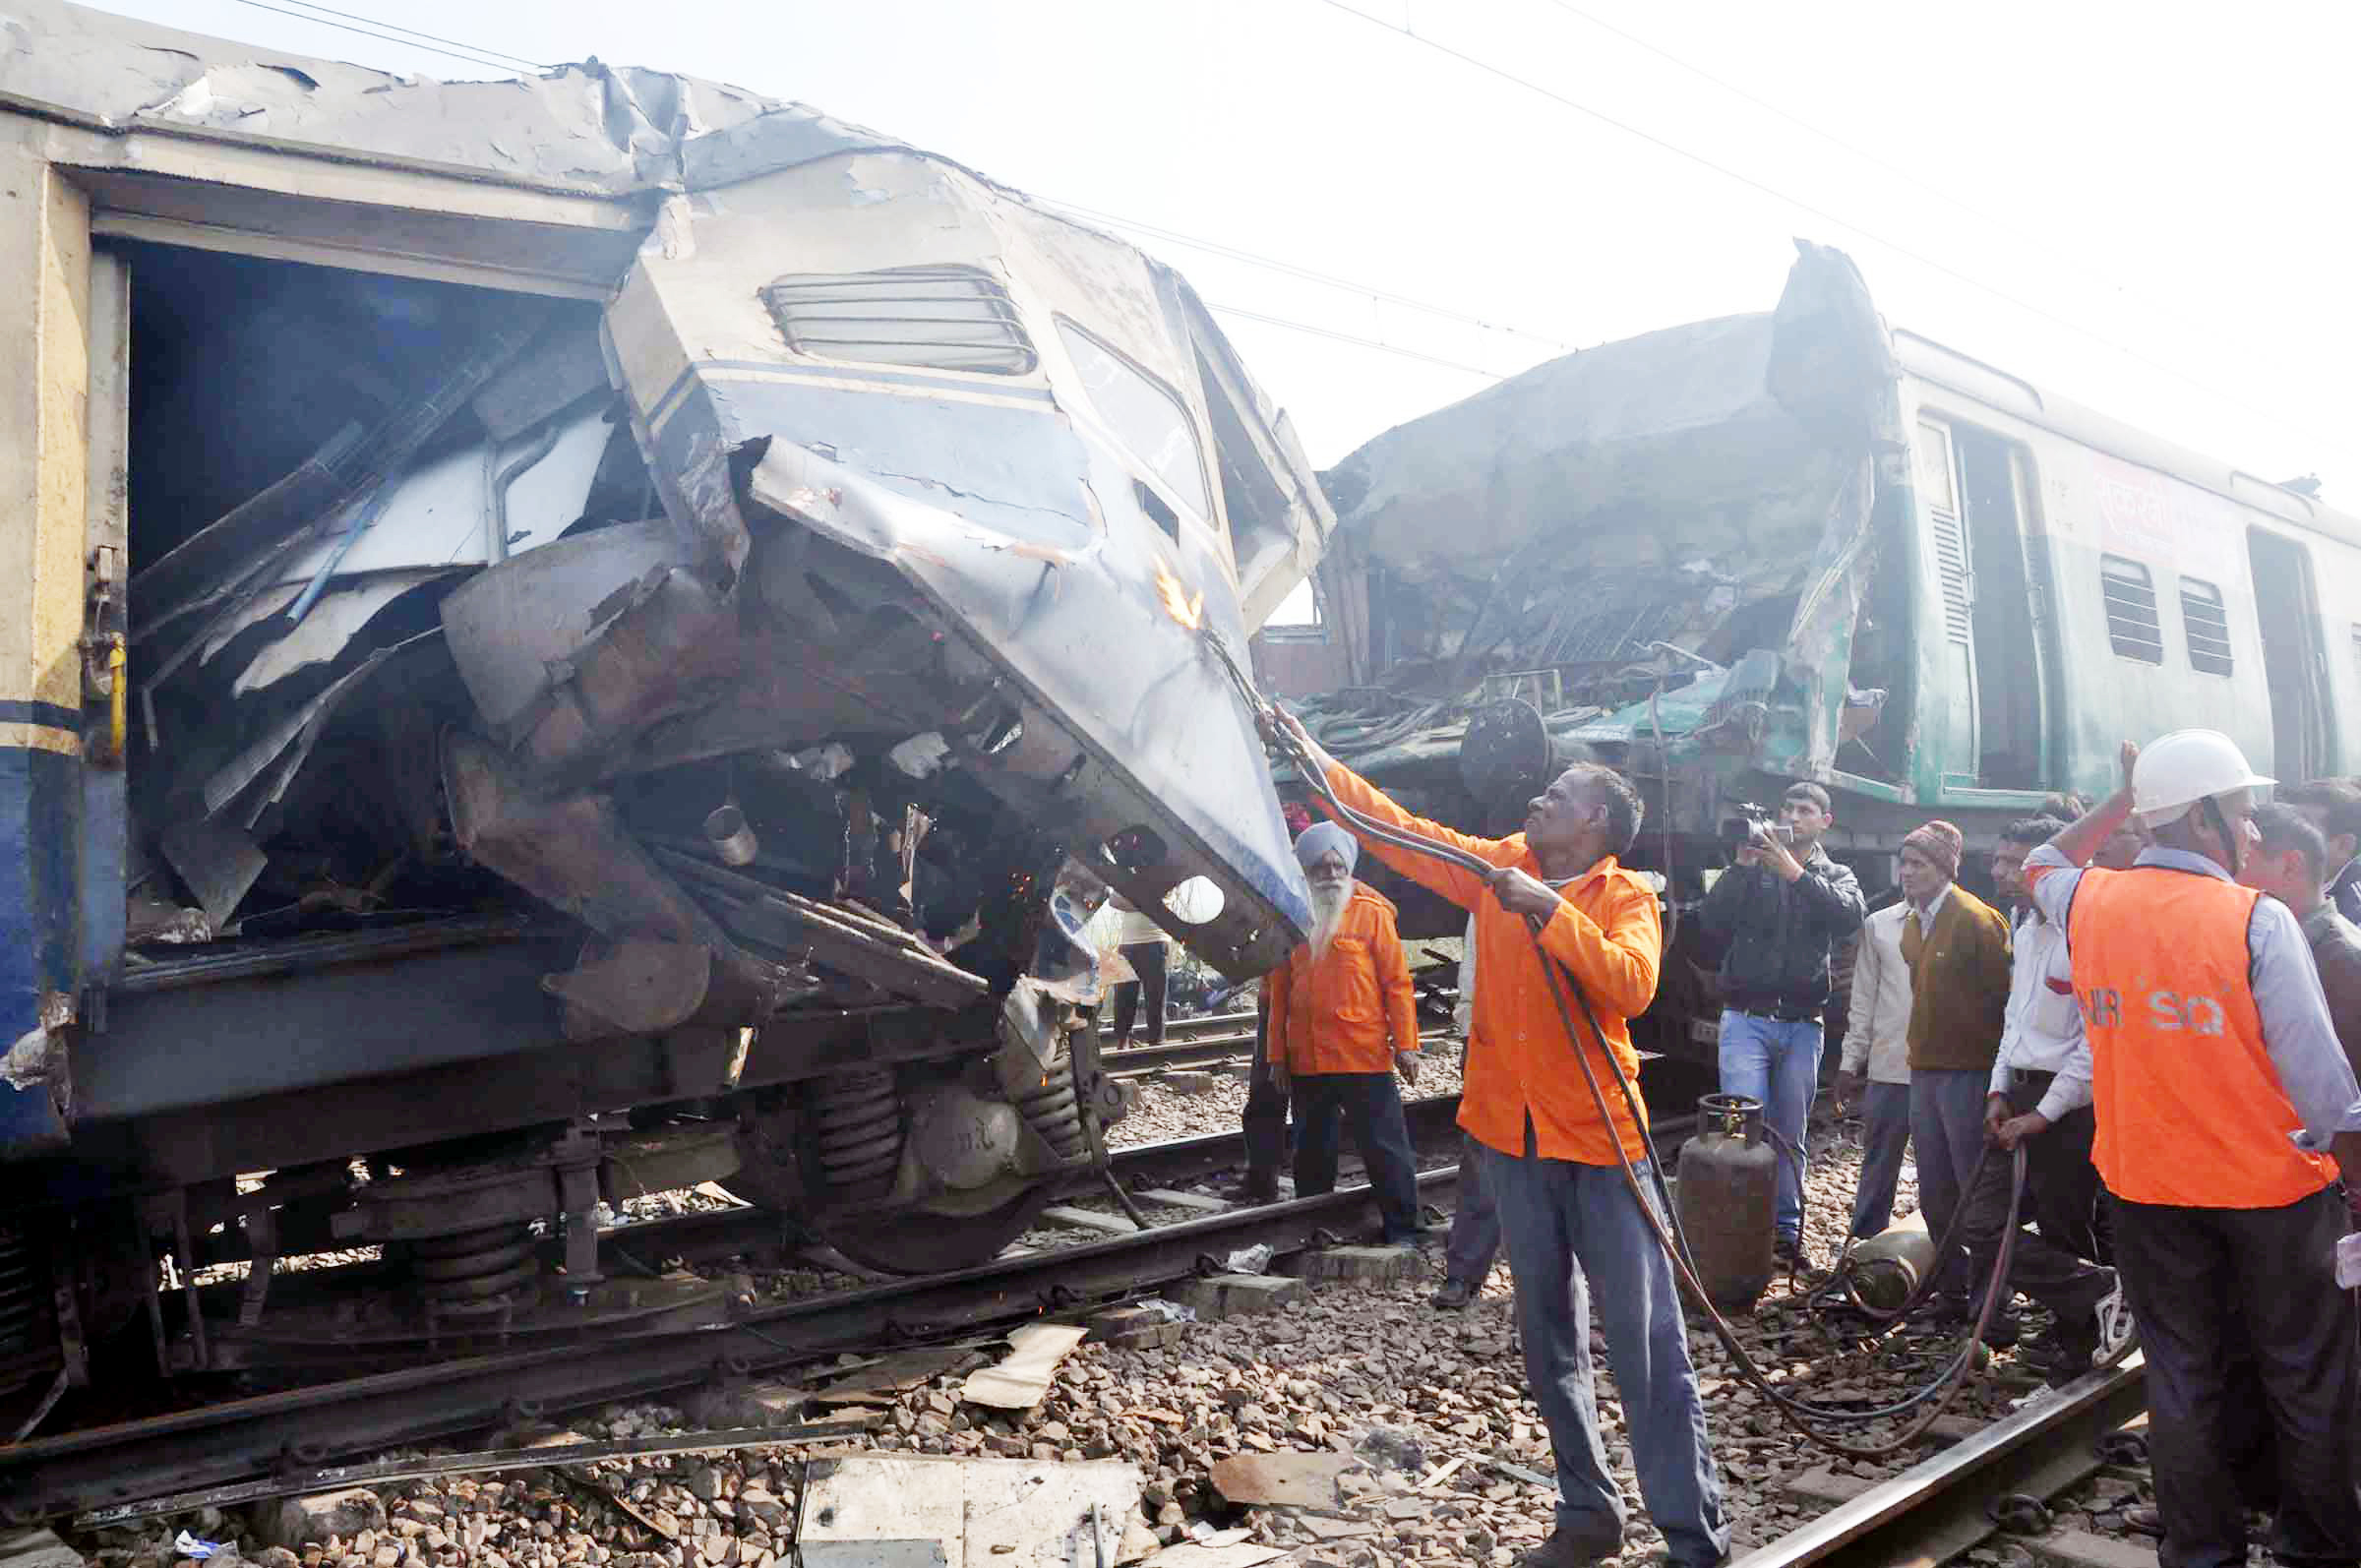 Railway officials engaged in removing damaged coaches of Lokmanya Tilak Express and EMU train which collided in Haryana's Palwal district on Tuesday morning, at least one person killed and over 100 injured in the accident.(UNI)